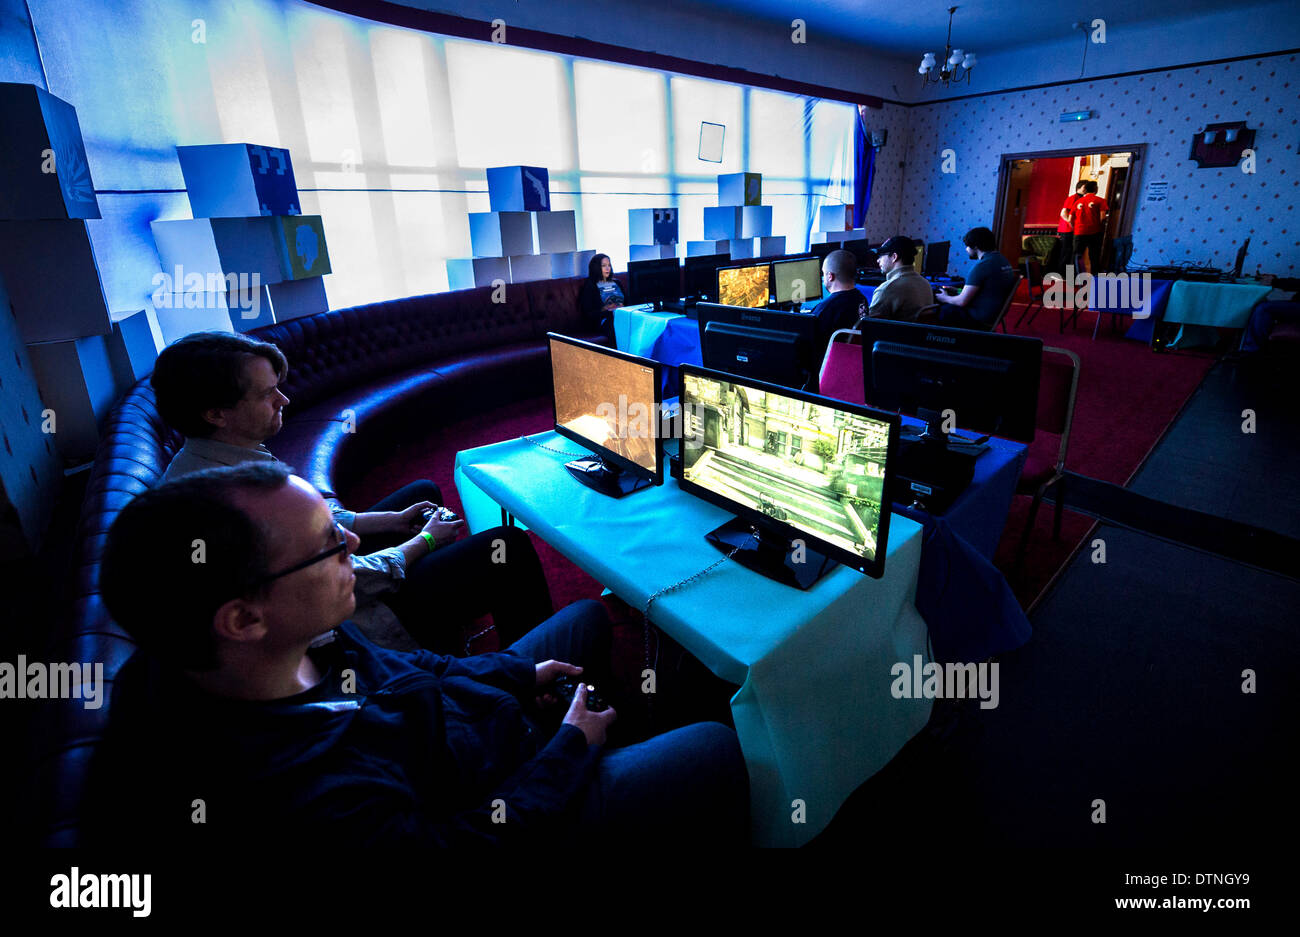 Margate, Kent, UK. 21st February, 2014.  Adult gamers enjoying themselves at GEEK 2014, a gaming EXPO in Margate.  Photographer: Gordon Scammell/Alamy Live News Stock Photo